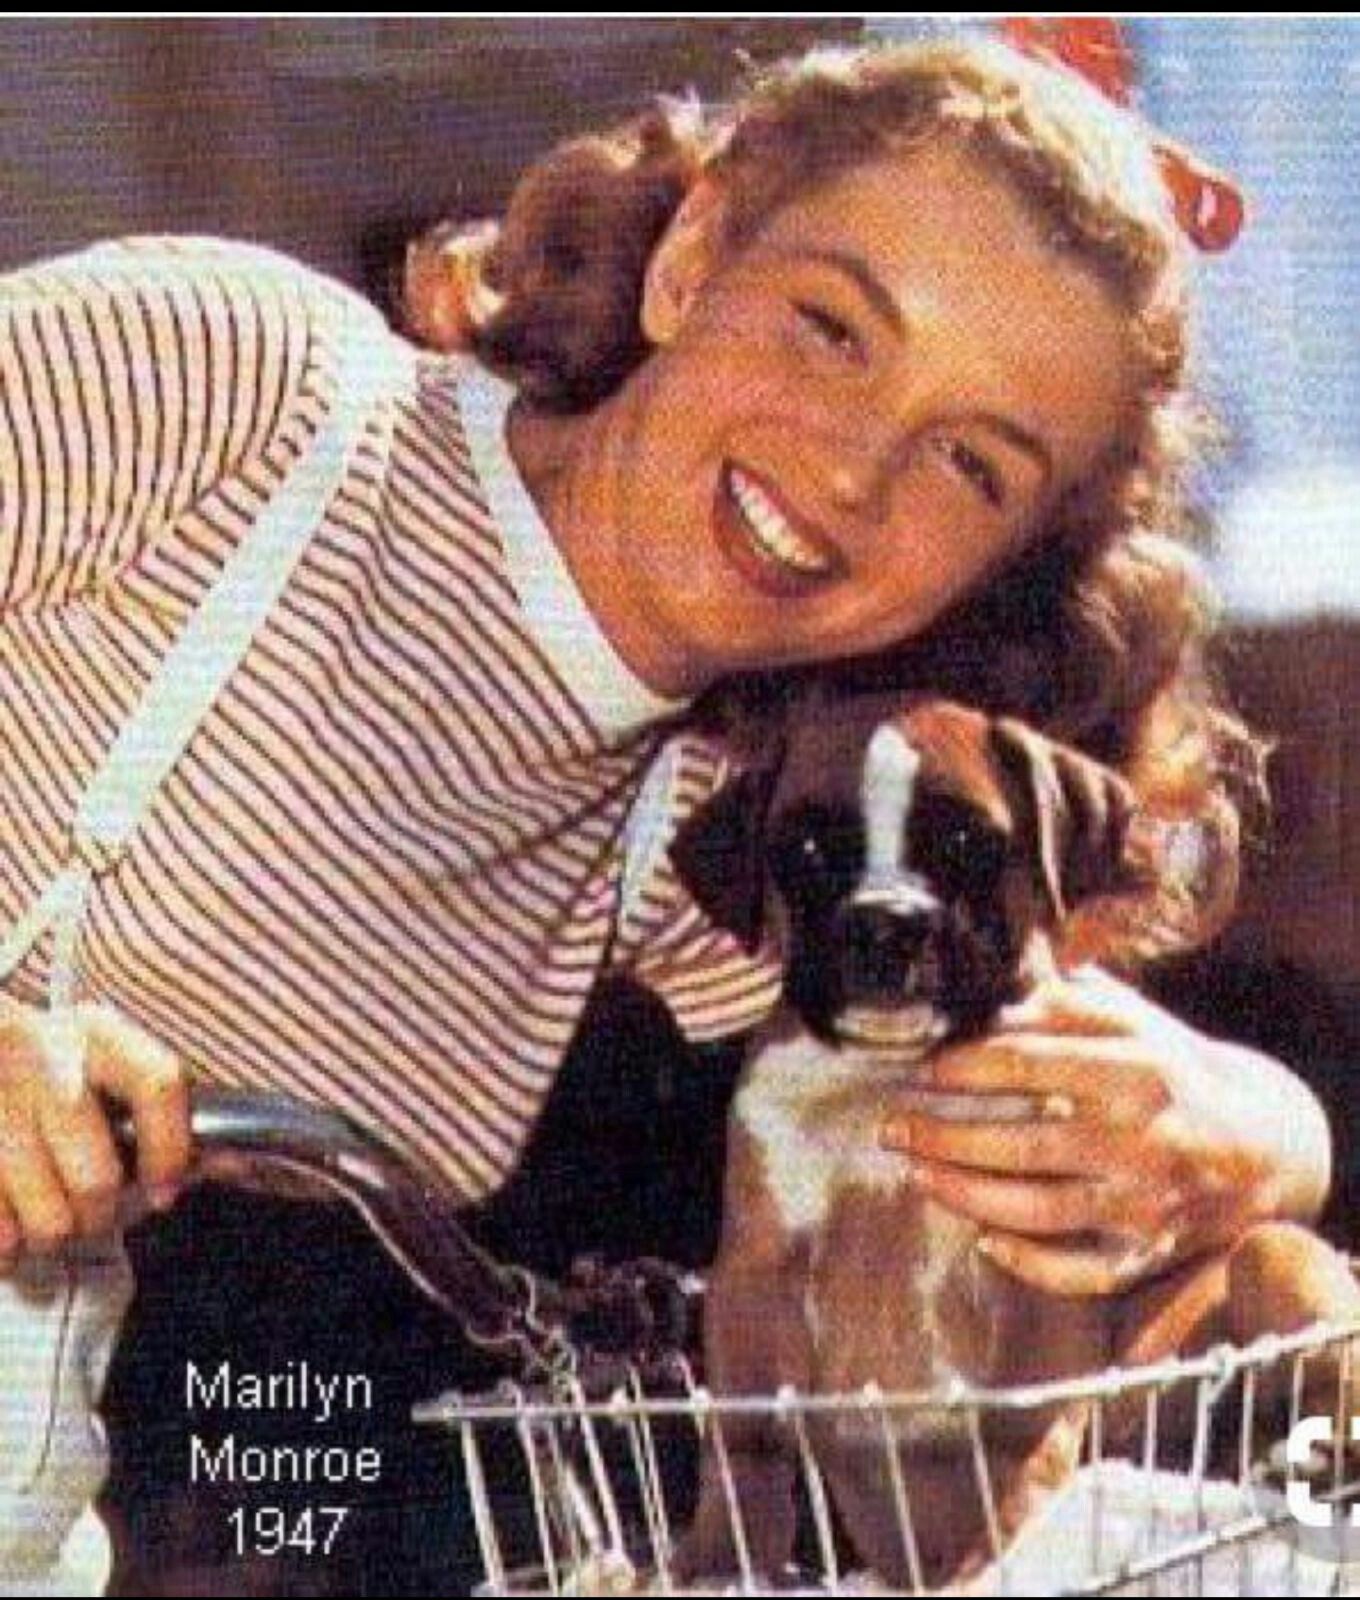 Marilyn Monroes with her Boxer puppy sitting inside the basket of a bike